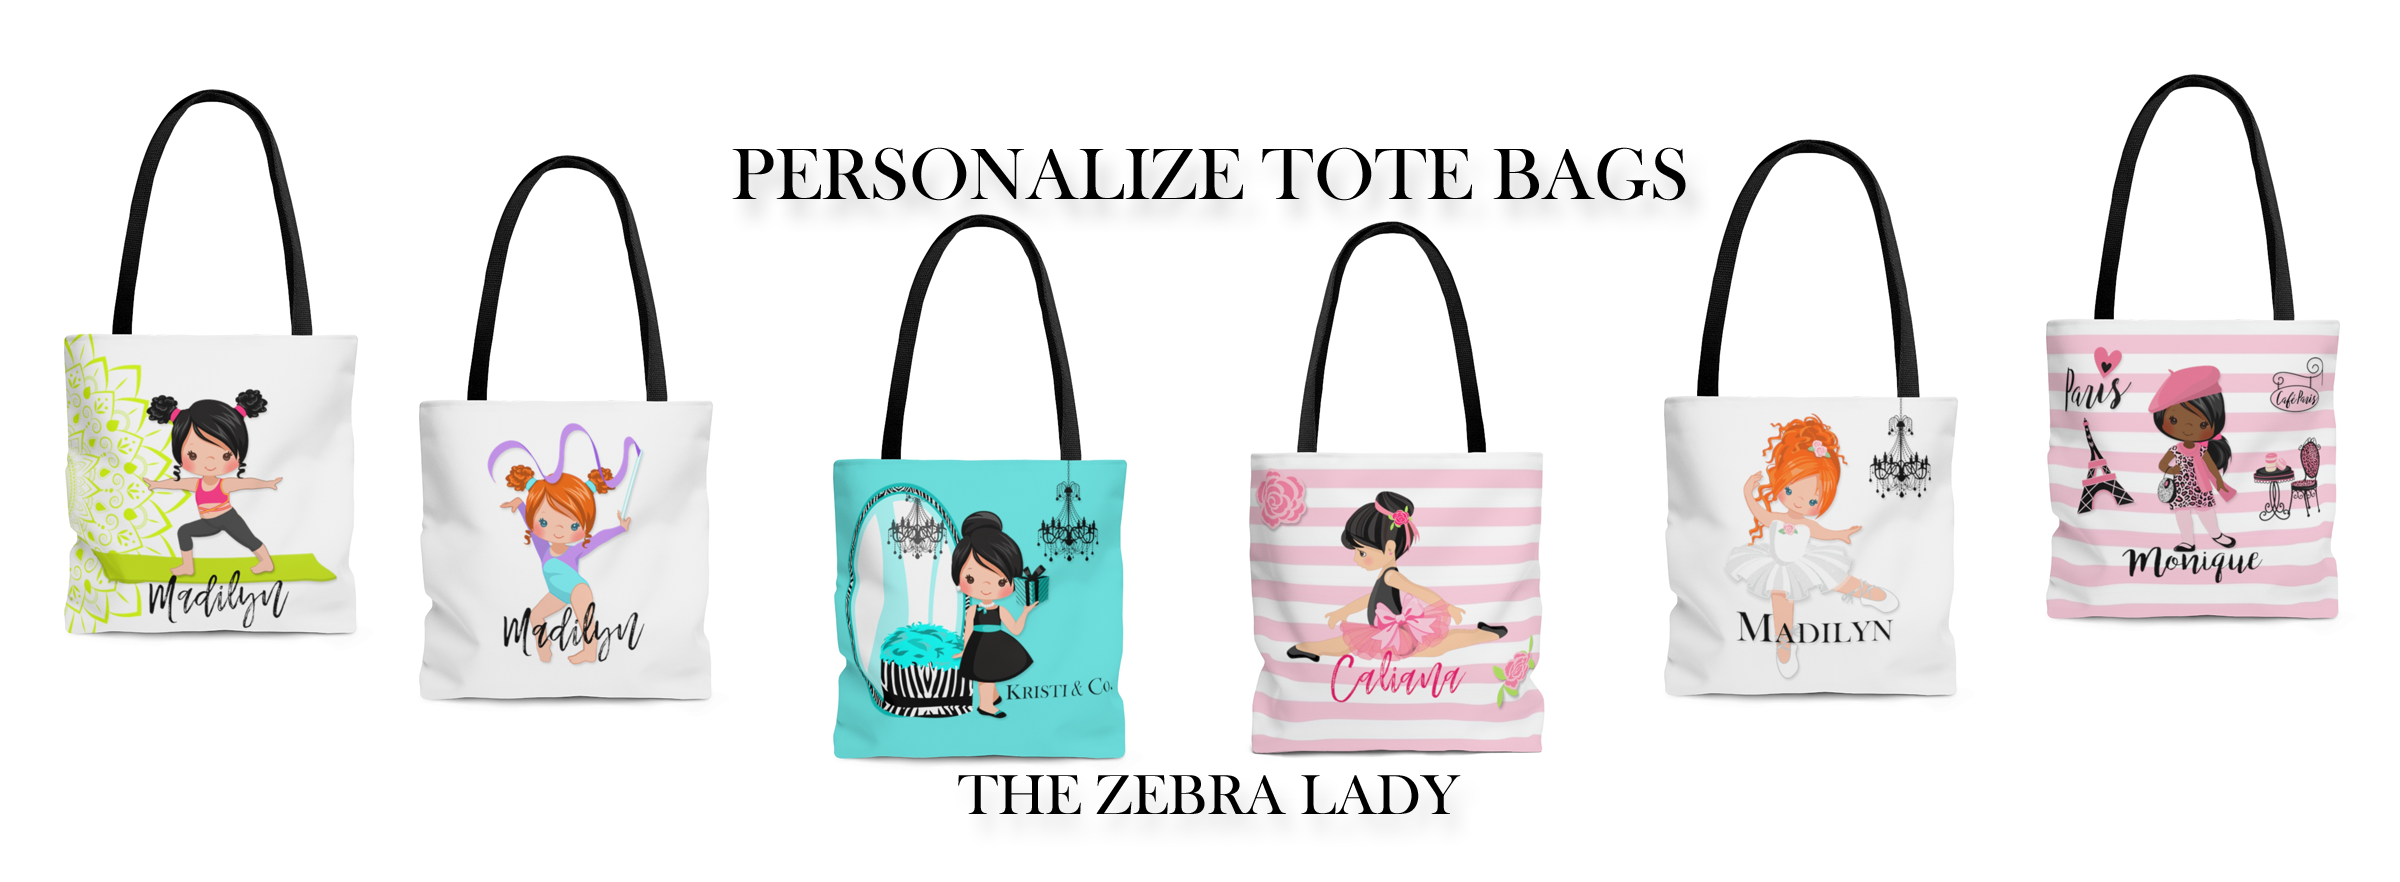 PERSONALIZE TOTE BAGS BANNER SQUARESPACE.png